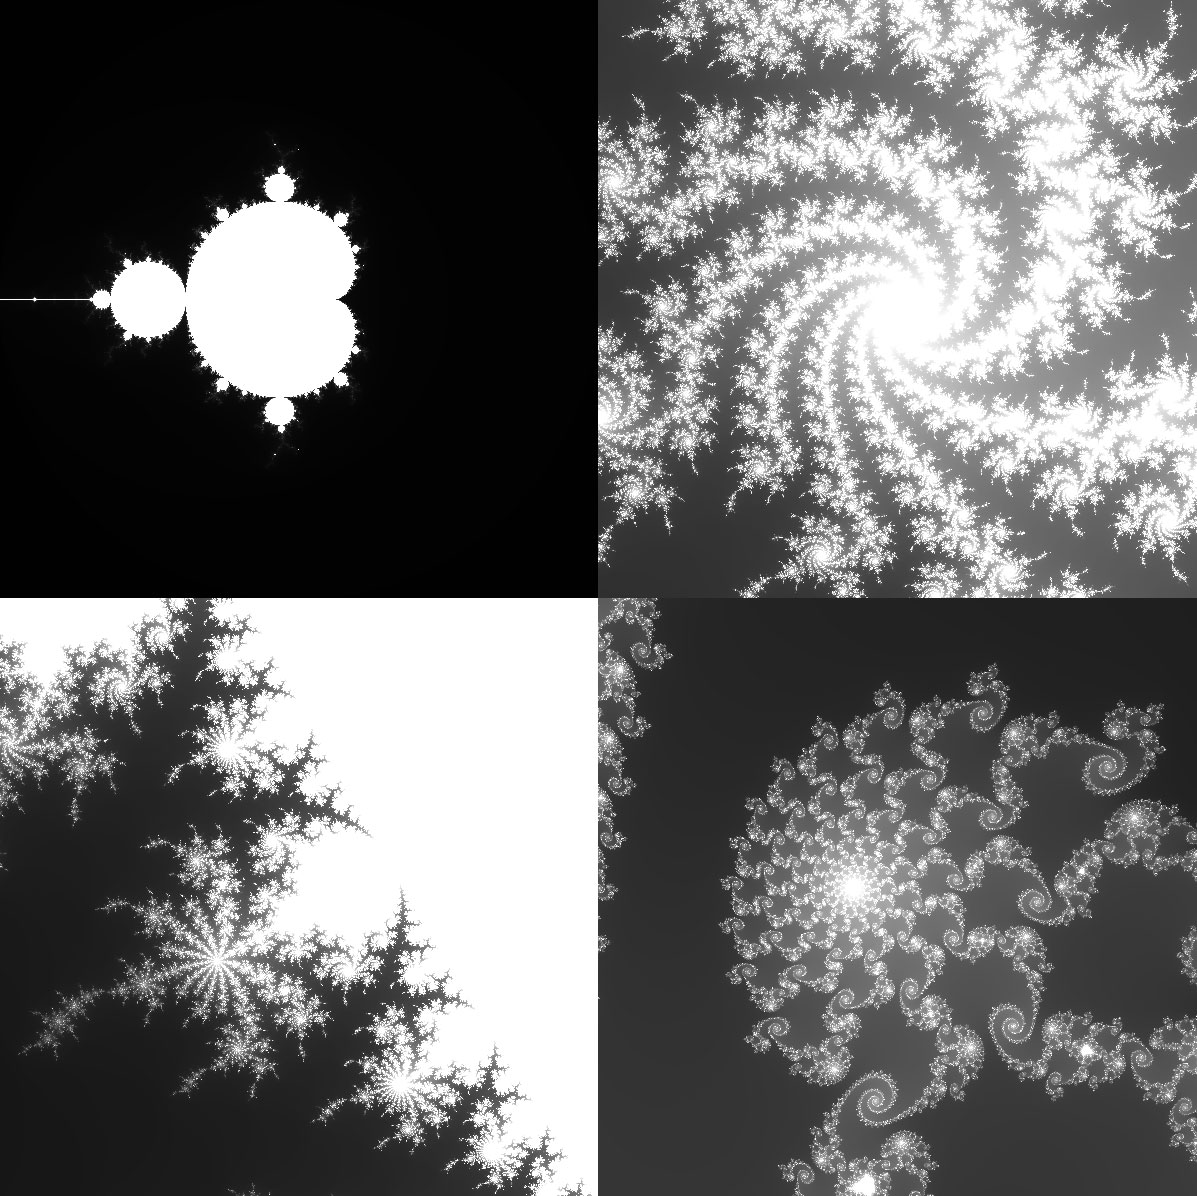 Various forms found in the Mandelbrot Set